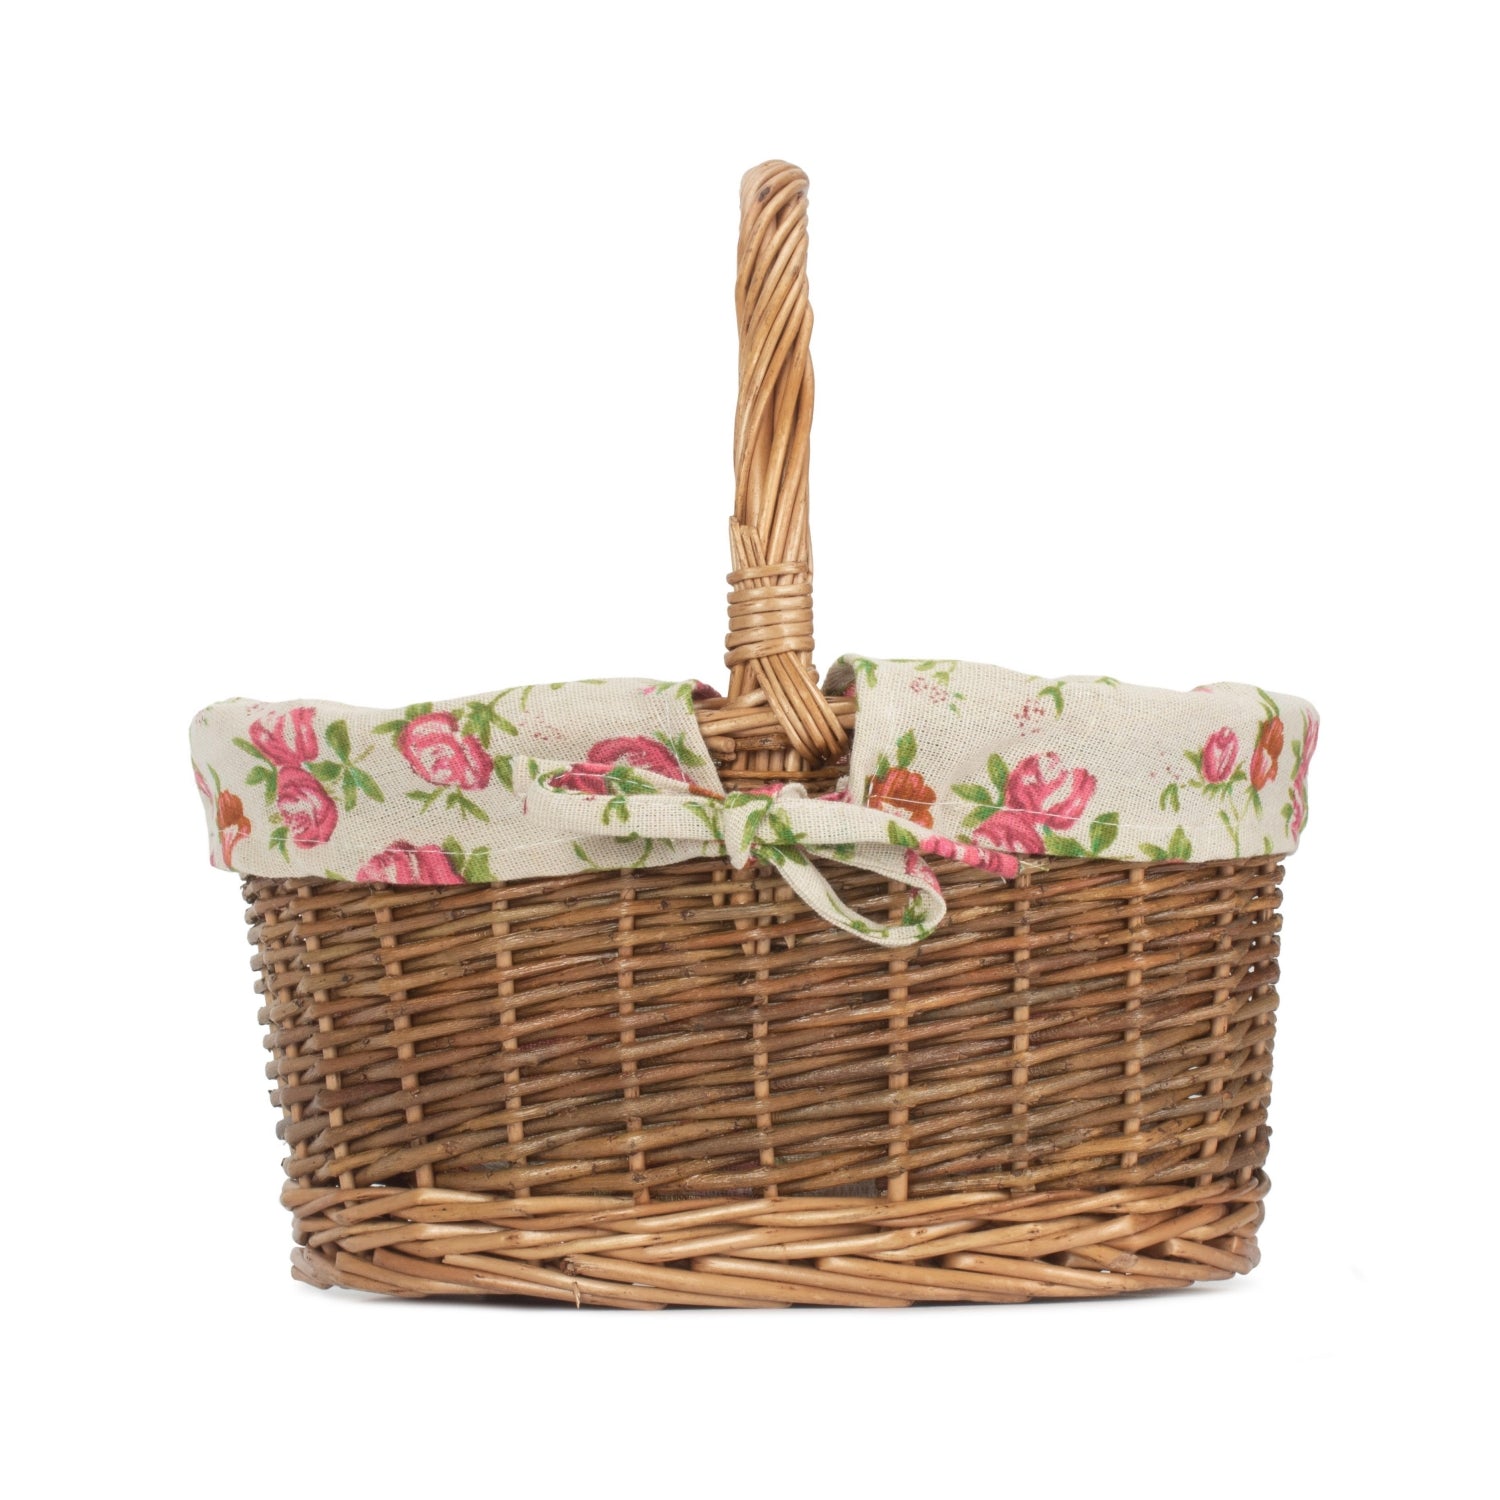 Red Hamper Garden Rose Lined Country Oval Wicker Shopping Basket